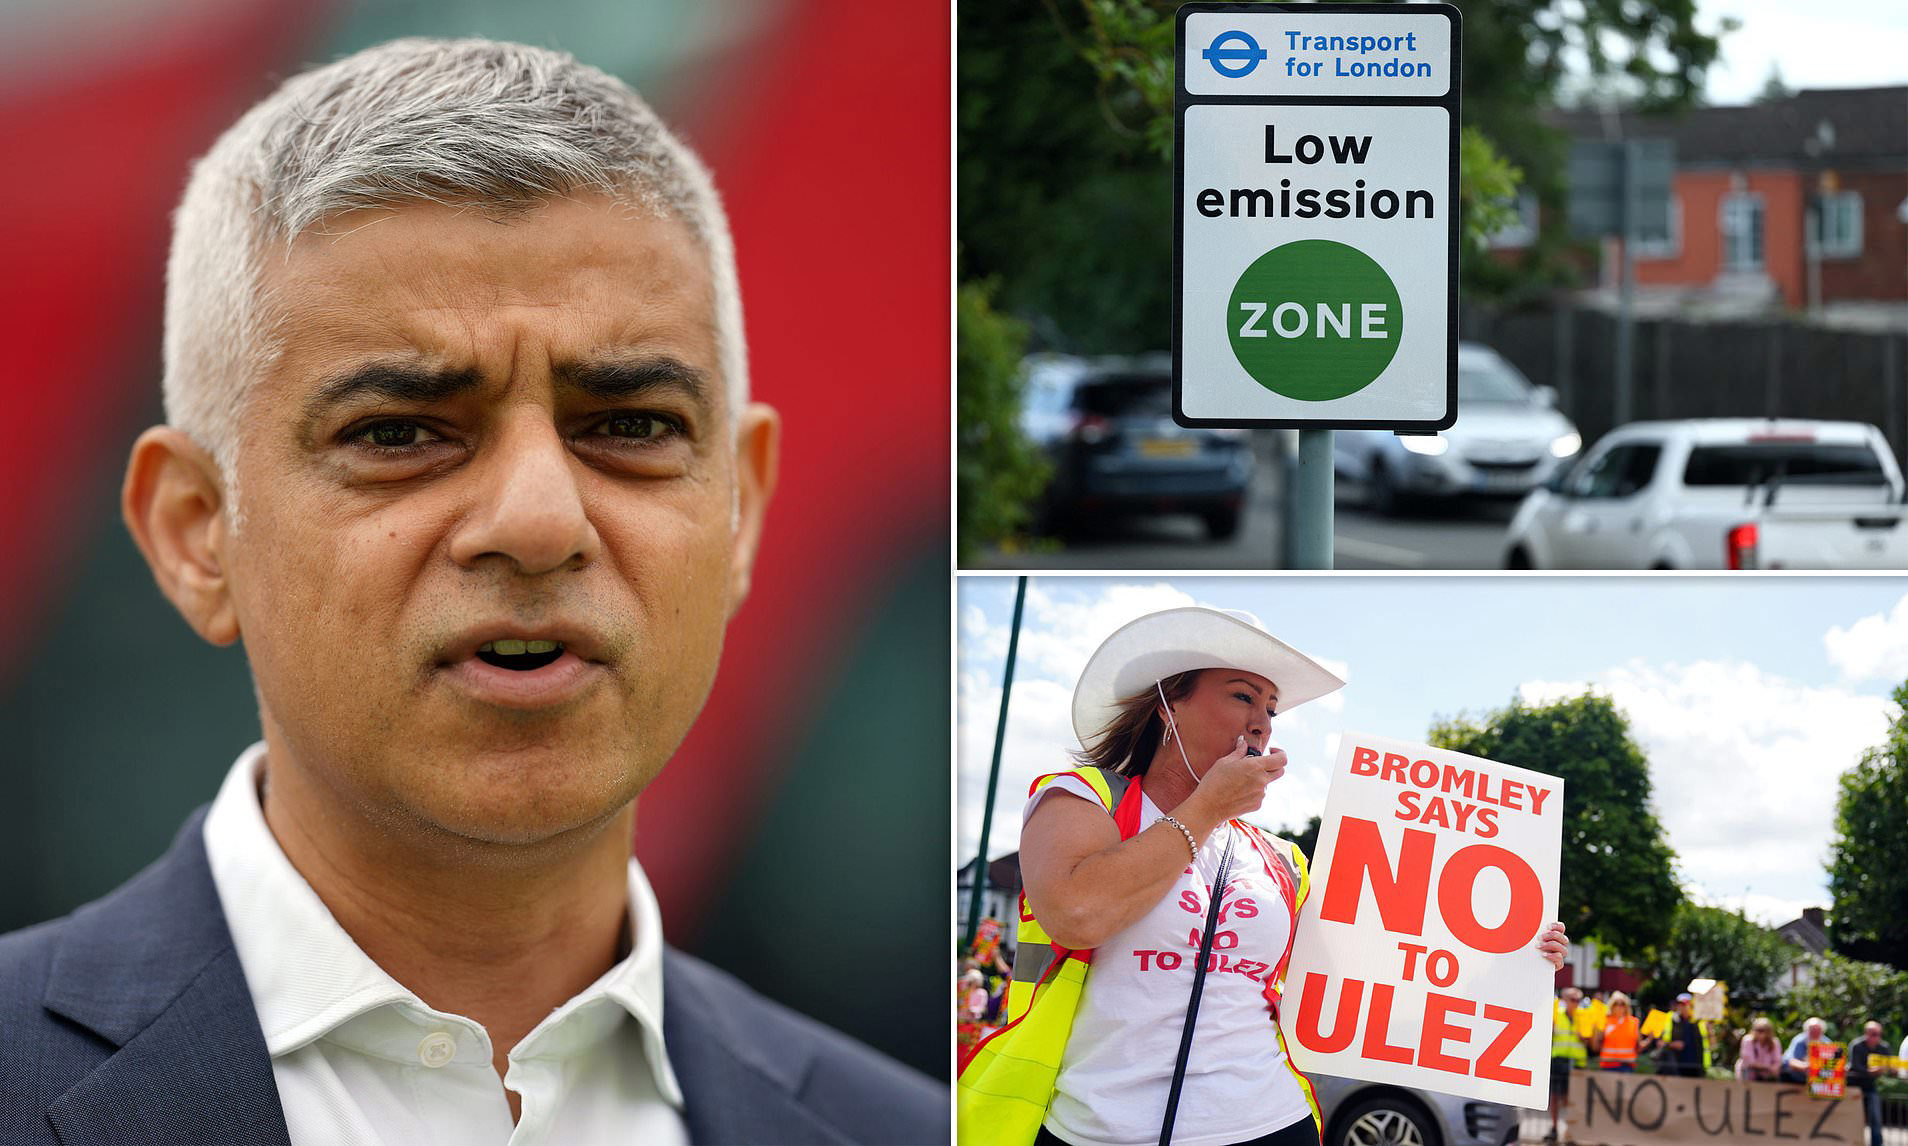 Sadiq Khan Blasts Ulez Critics And Insists He Will Be On The Right Side Of History With His